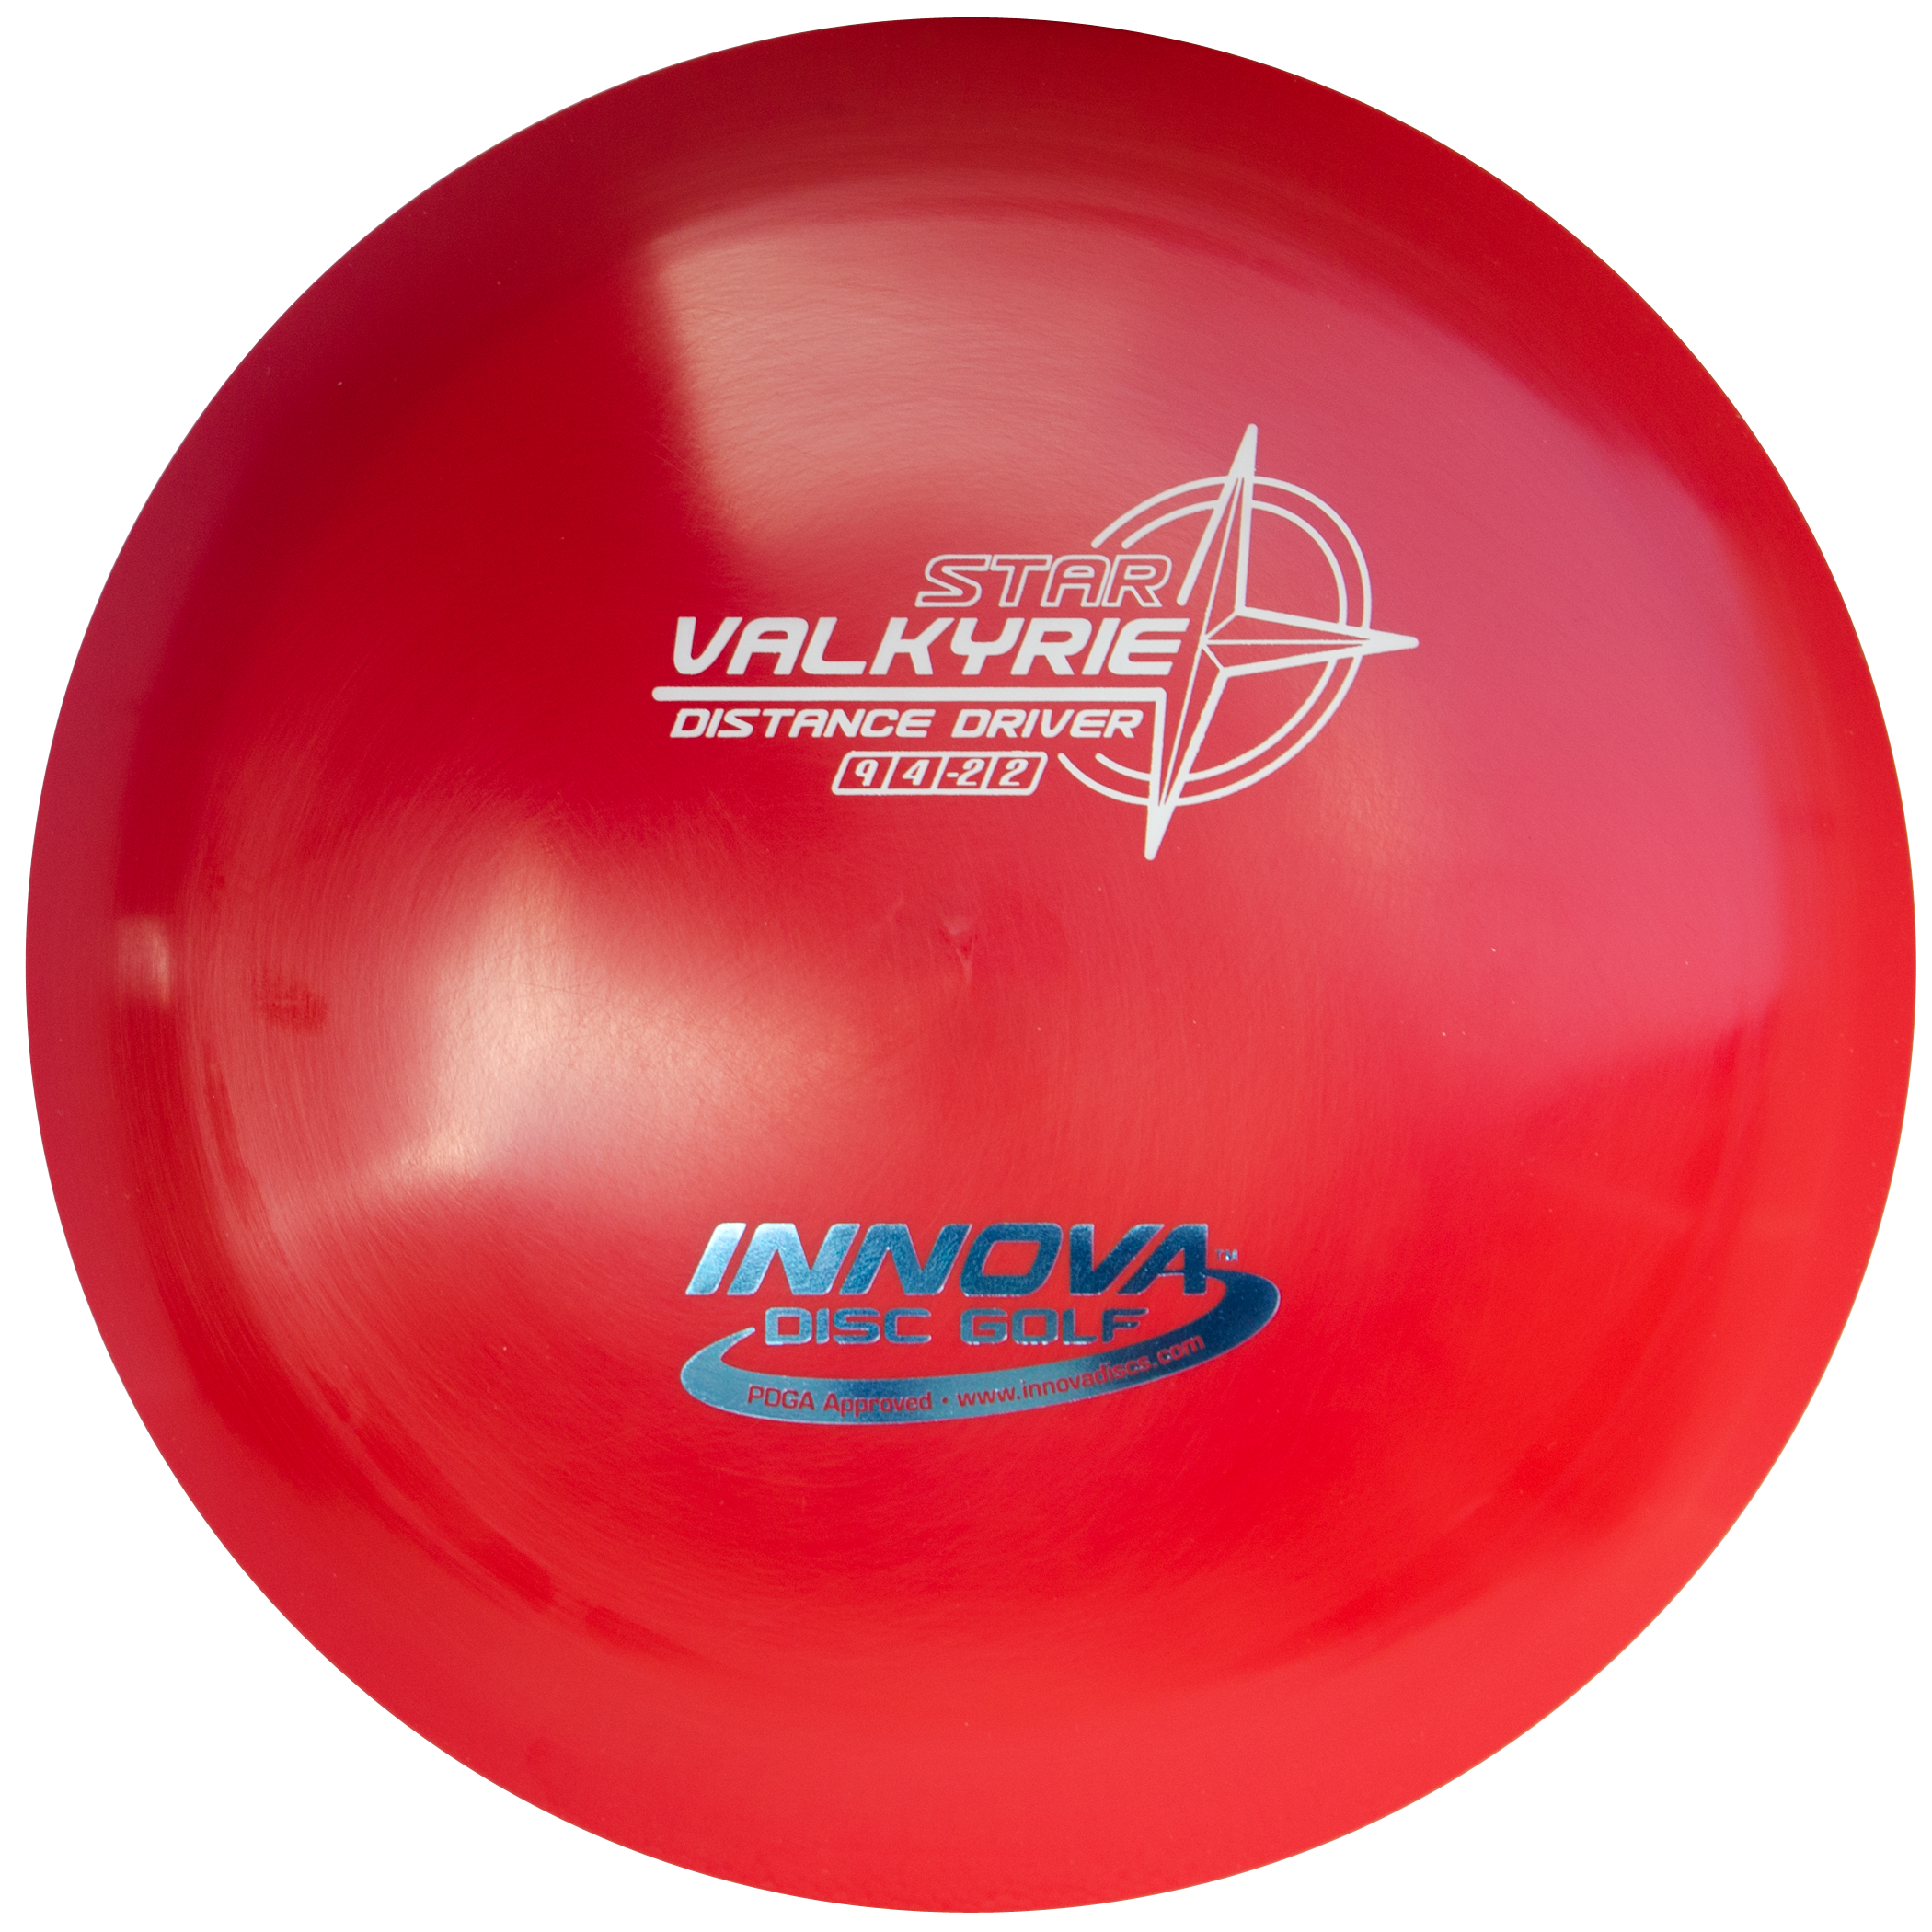 Product Image for Innova Star Valkyrie